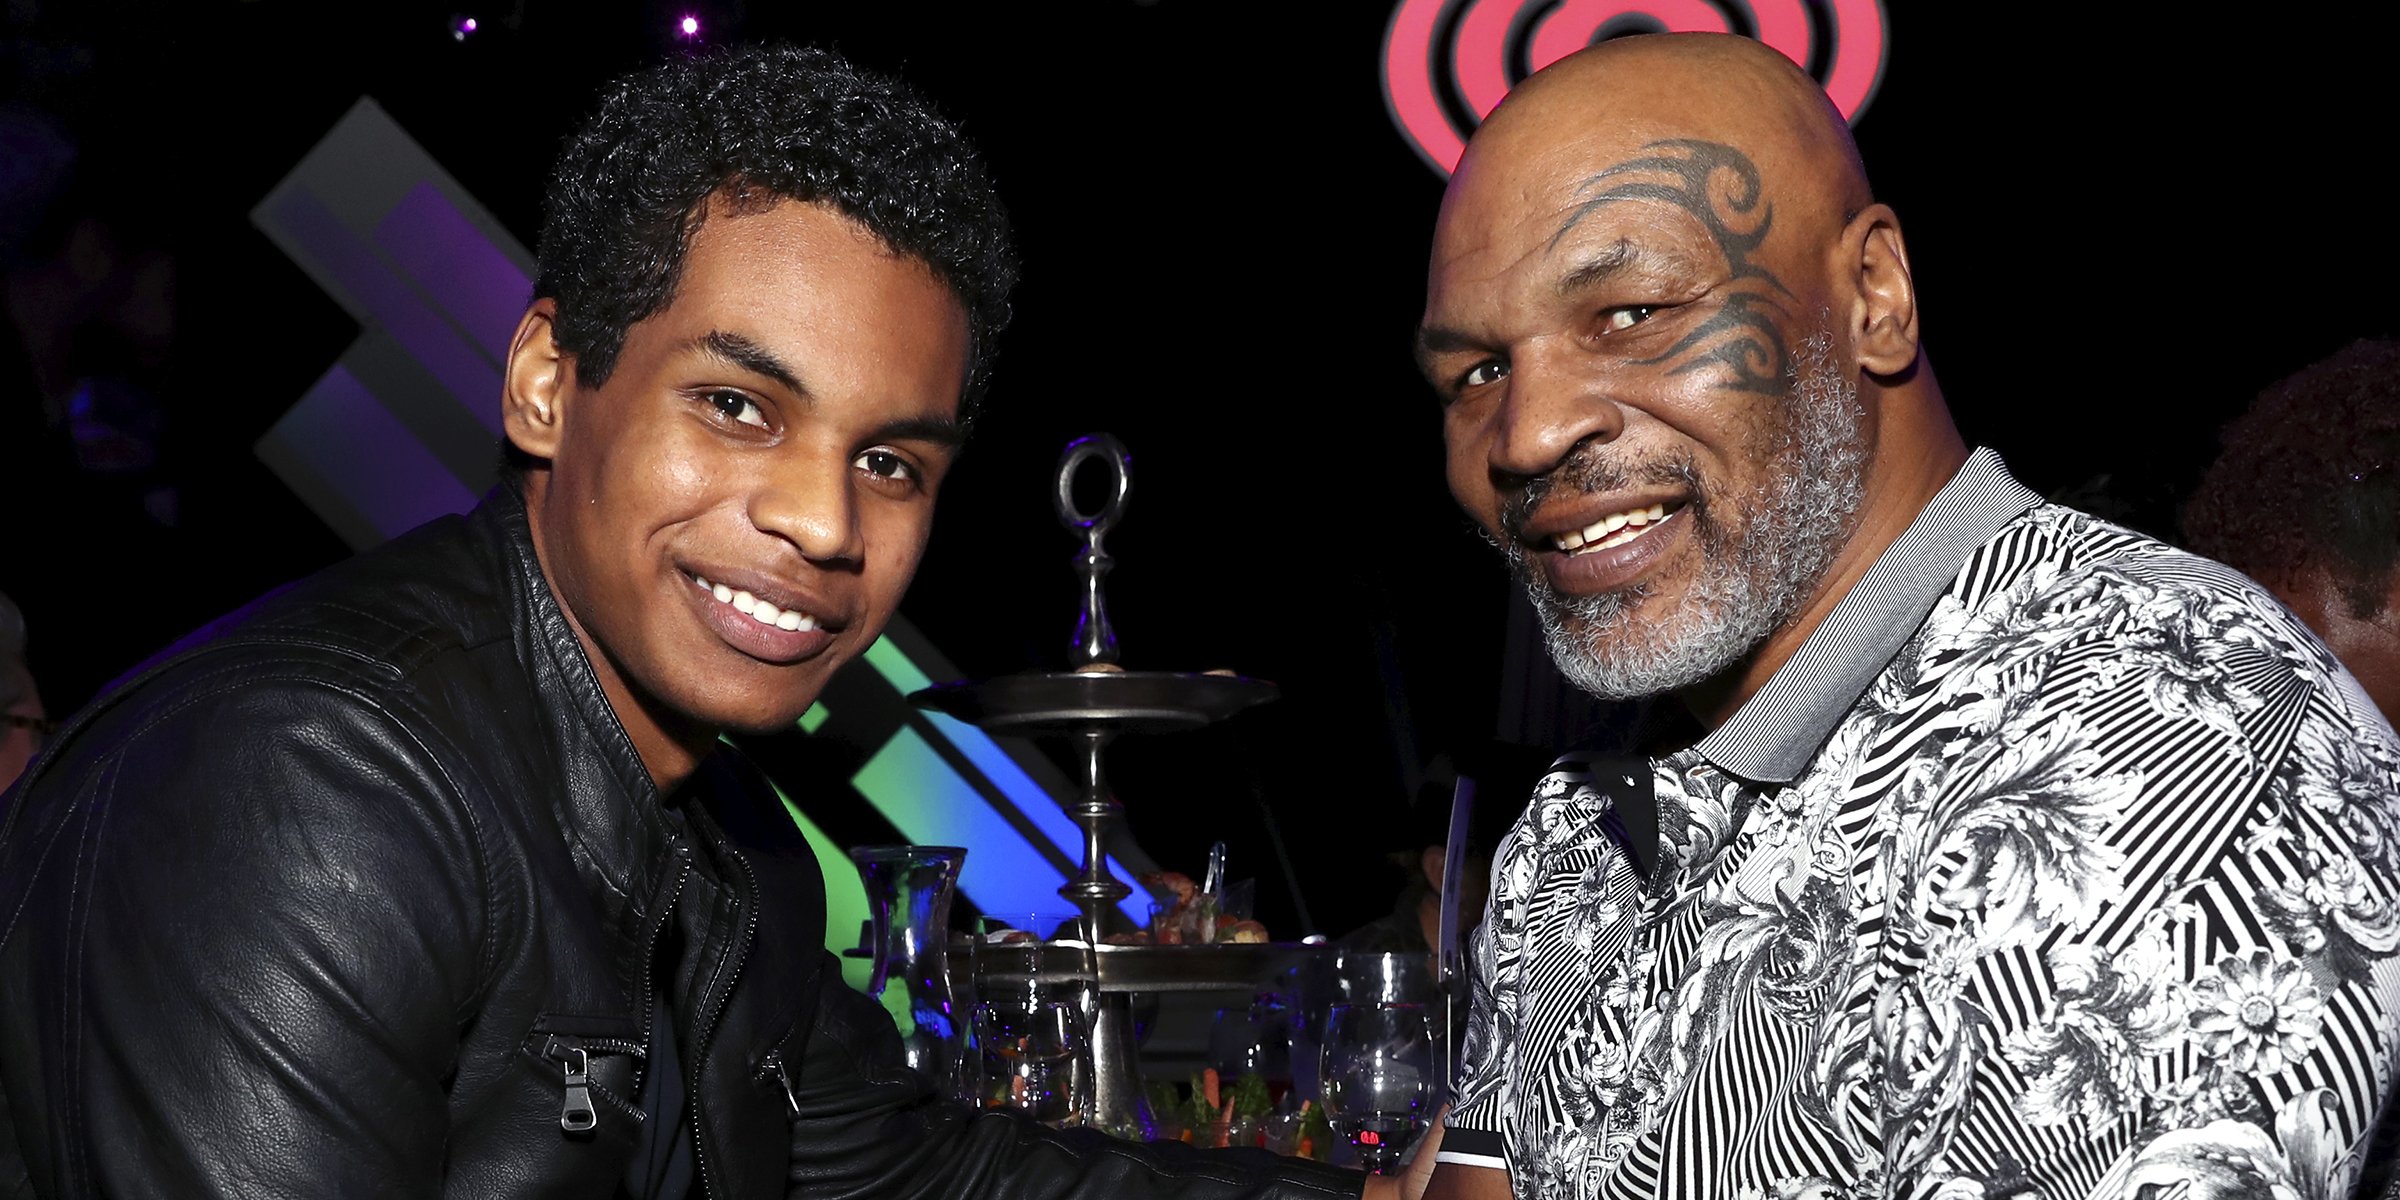 Miguel Leon Tyson Is Mike Tyson’s Famously Known Son A Look into Their